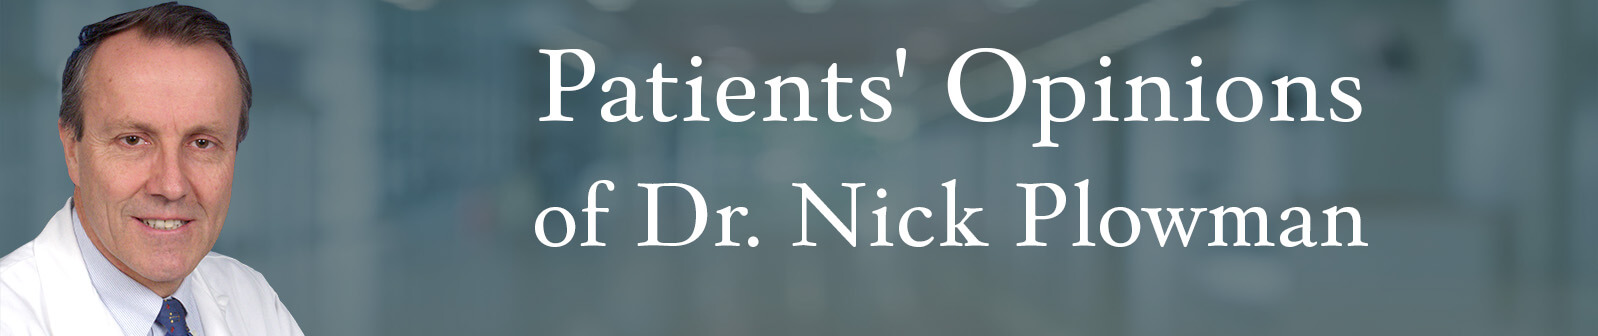 Patients' Opinions of Dr. Nick Plowman